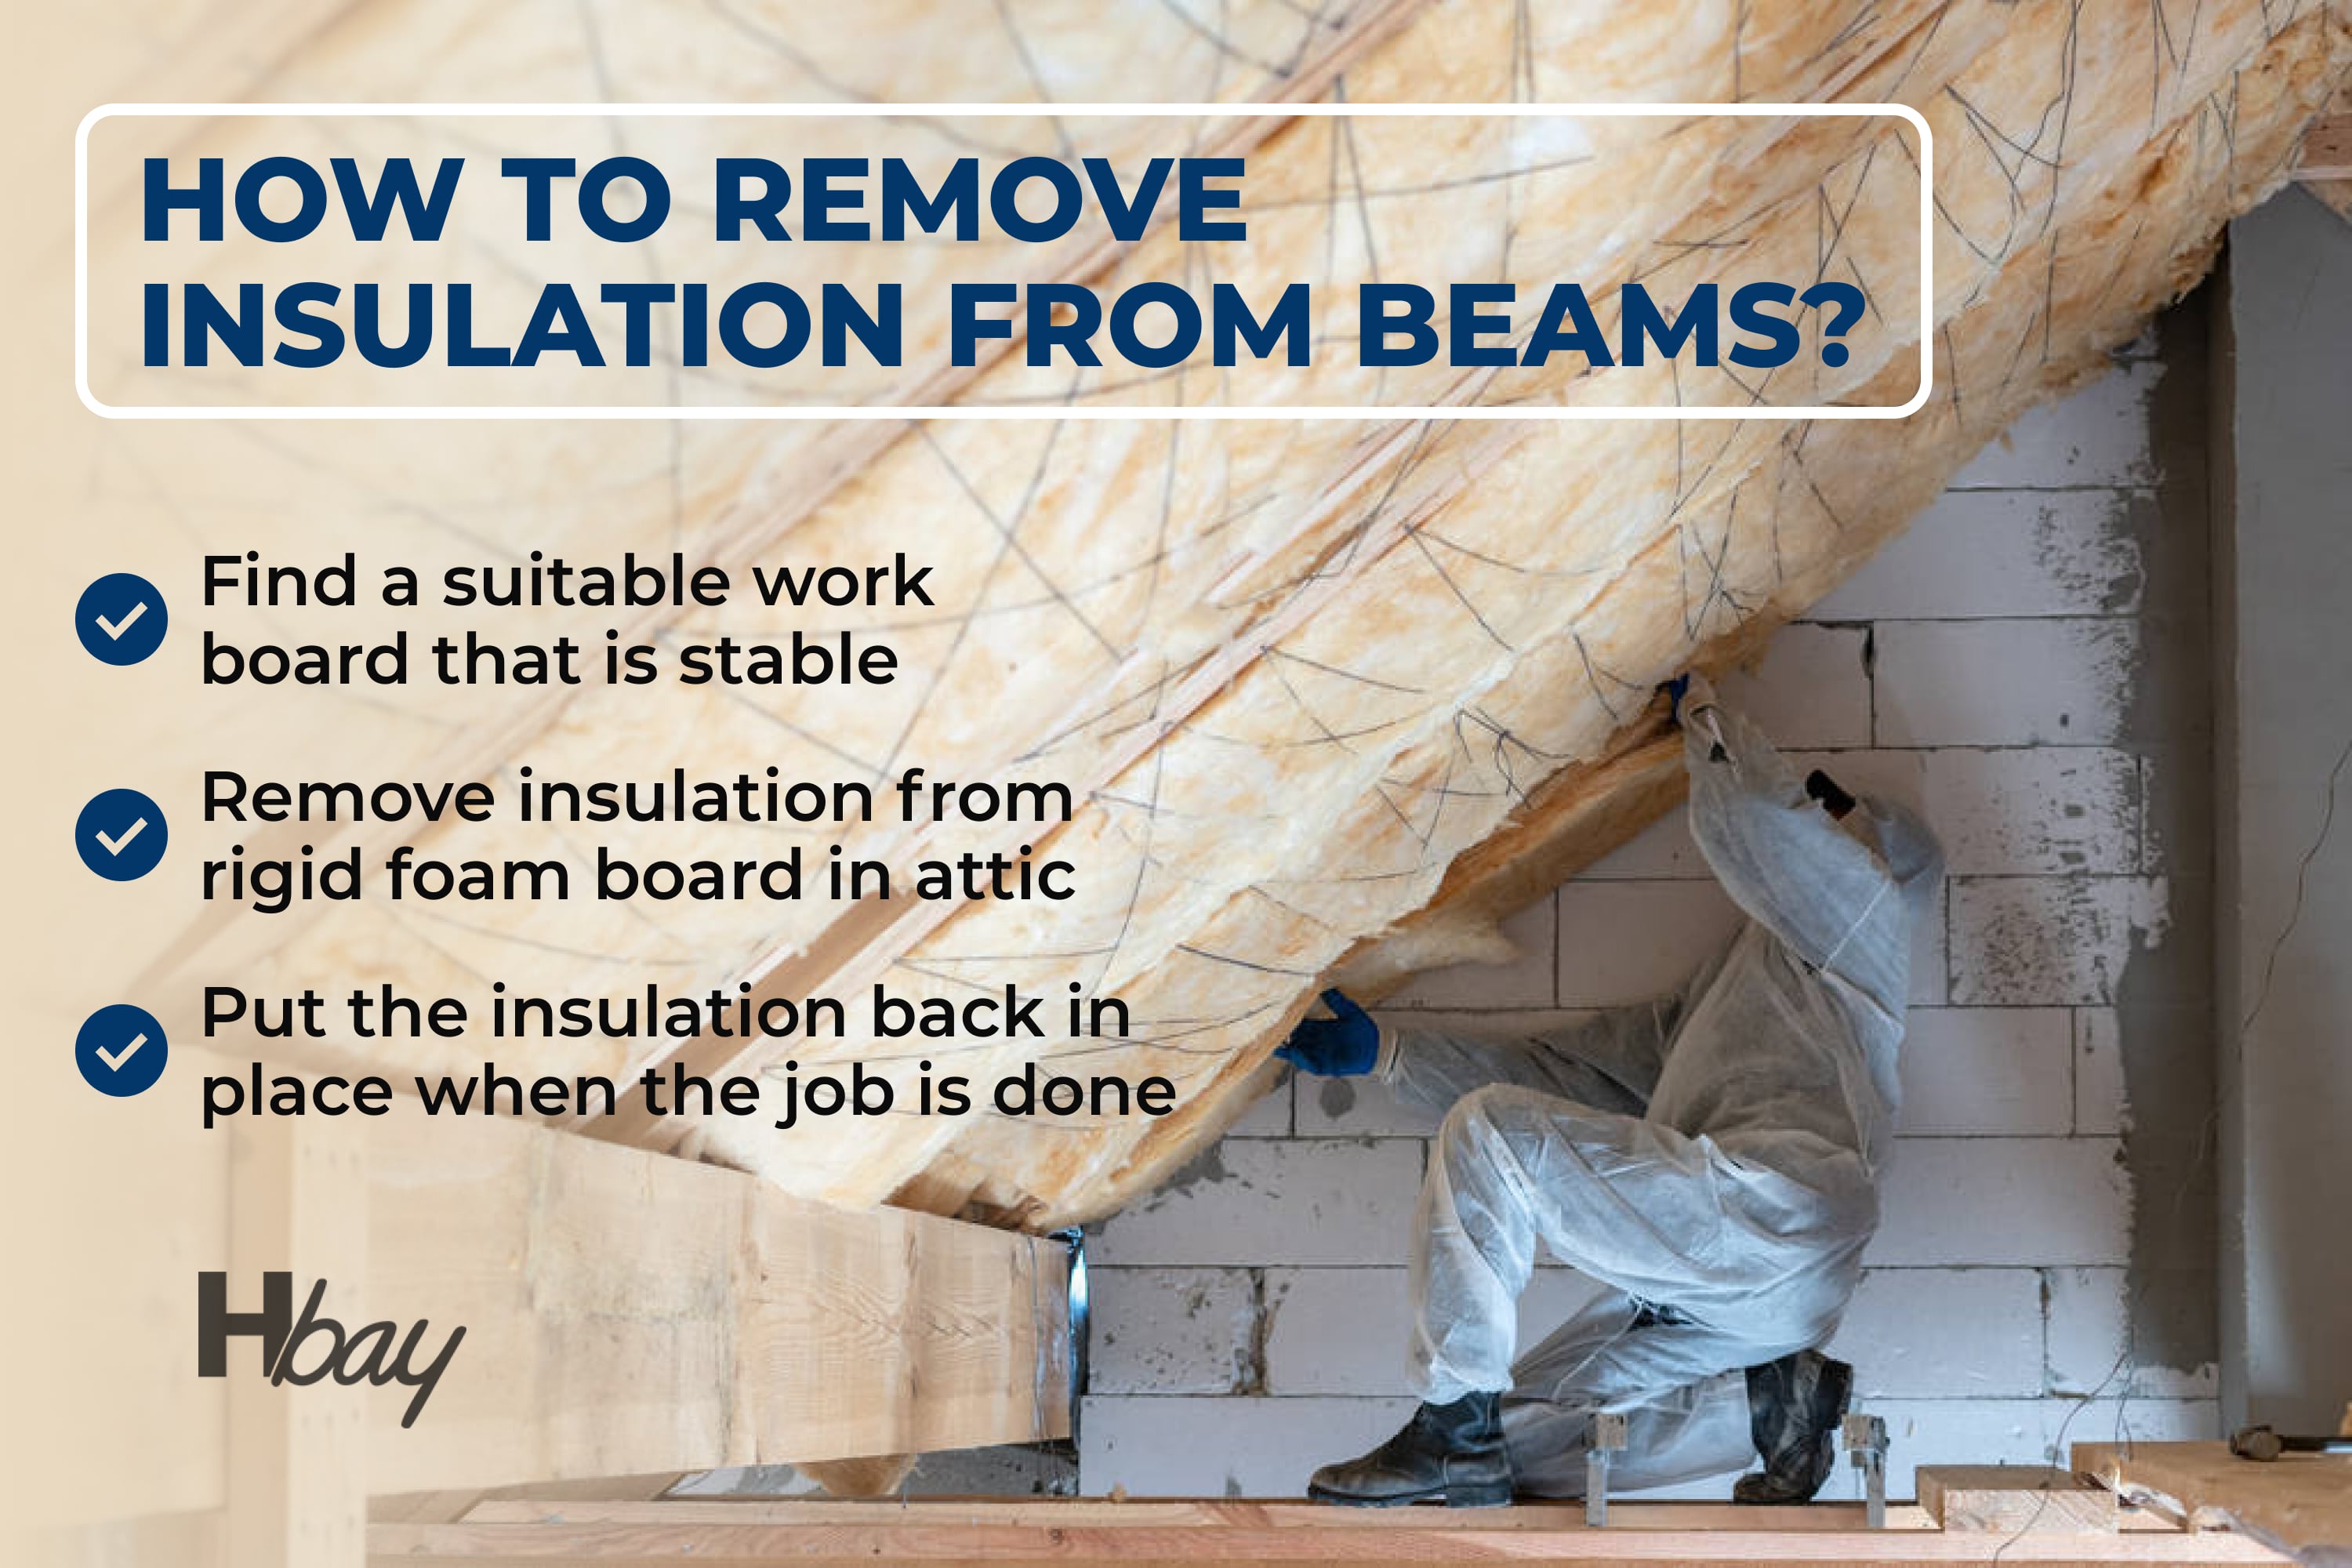 Sweep the Insulation From the Joists